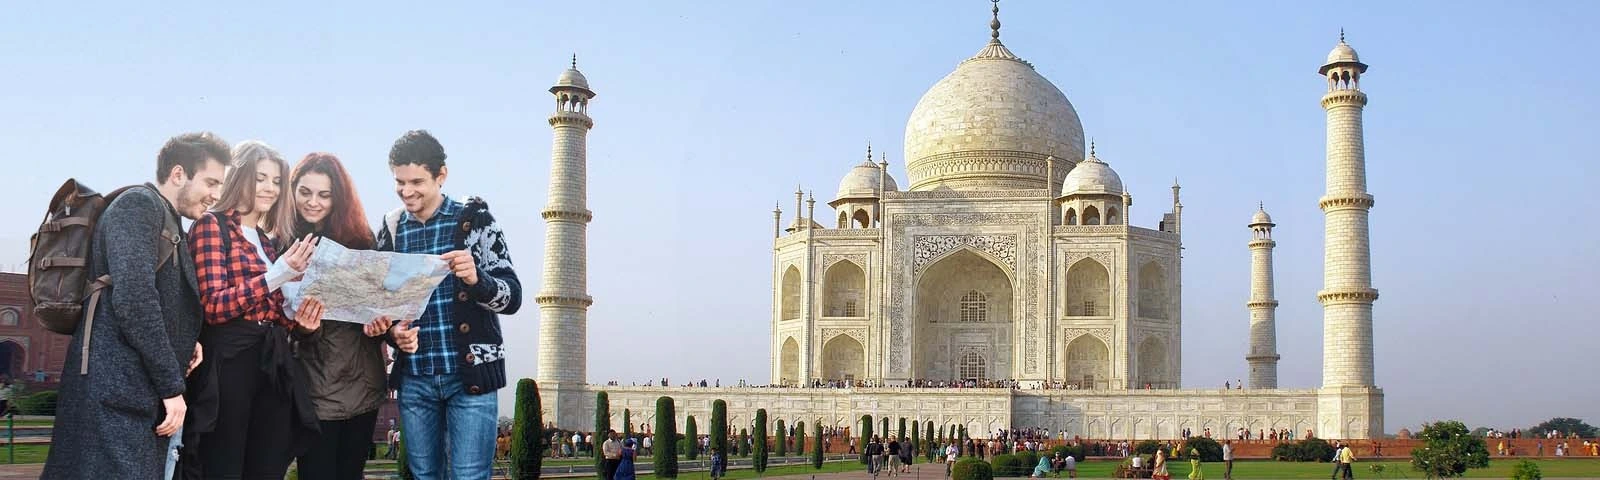 Guided Tour Packages India Desktop Banner